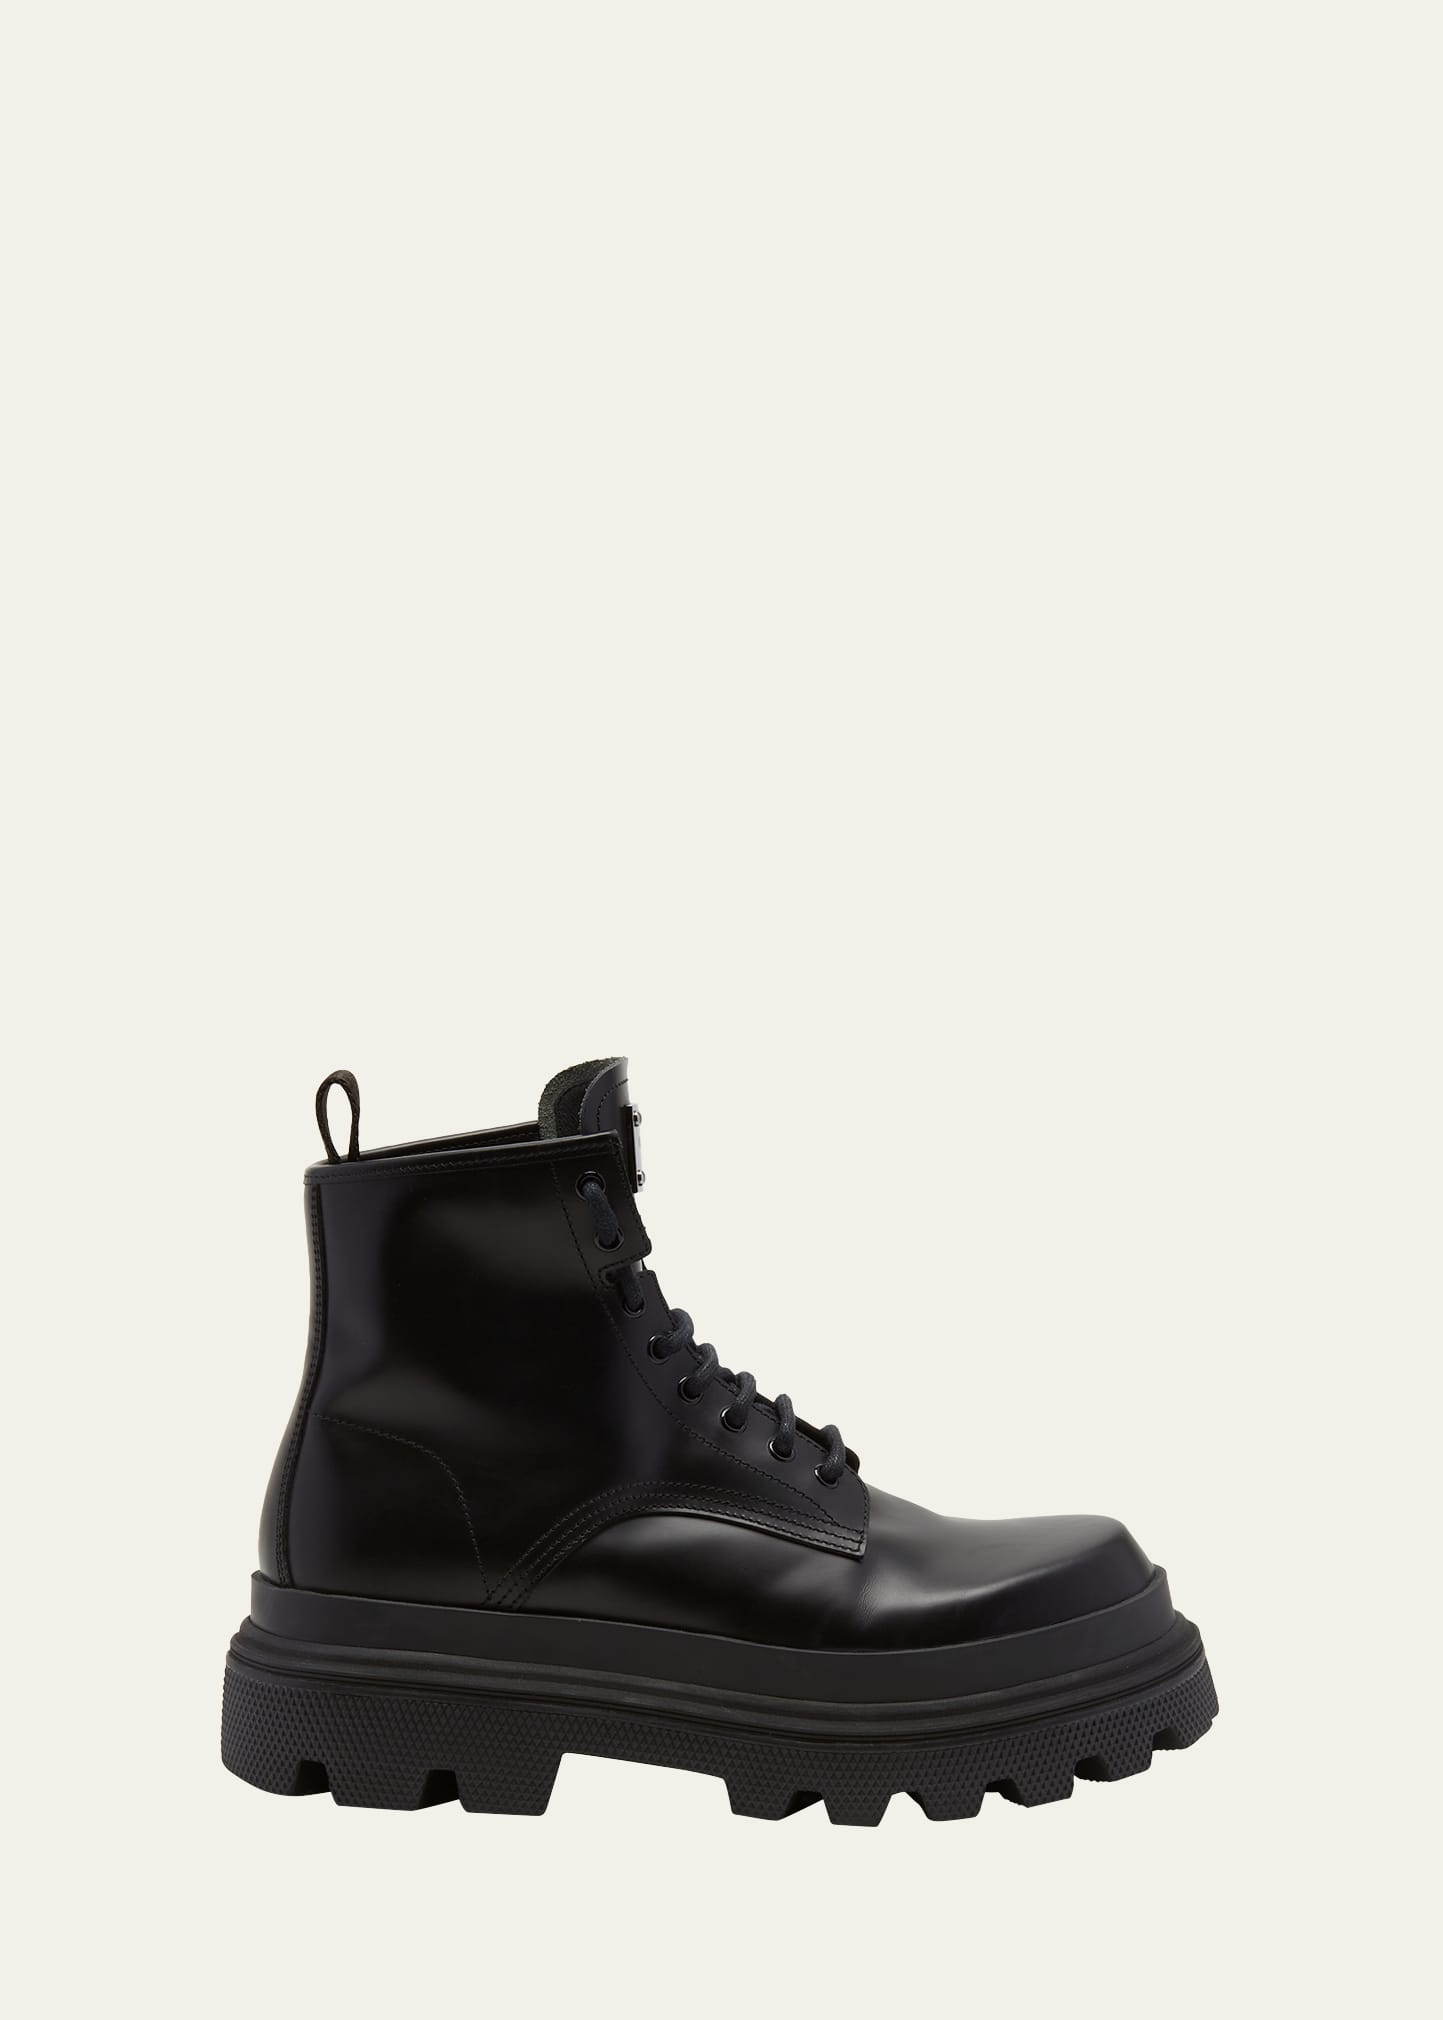 DOLCE & GABBANA MEN'S SPAZZ LEATHER COMBAT BOOTS